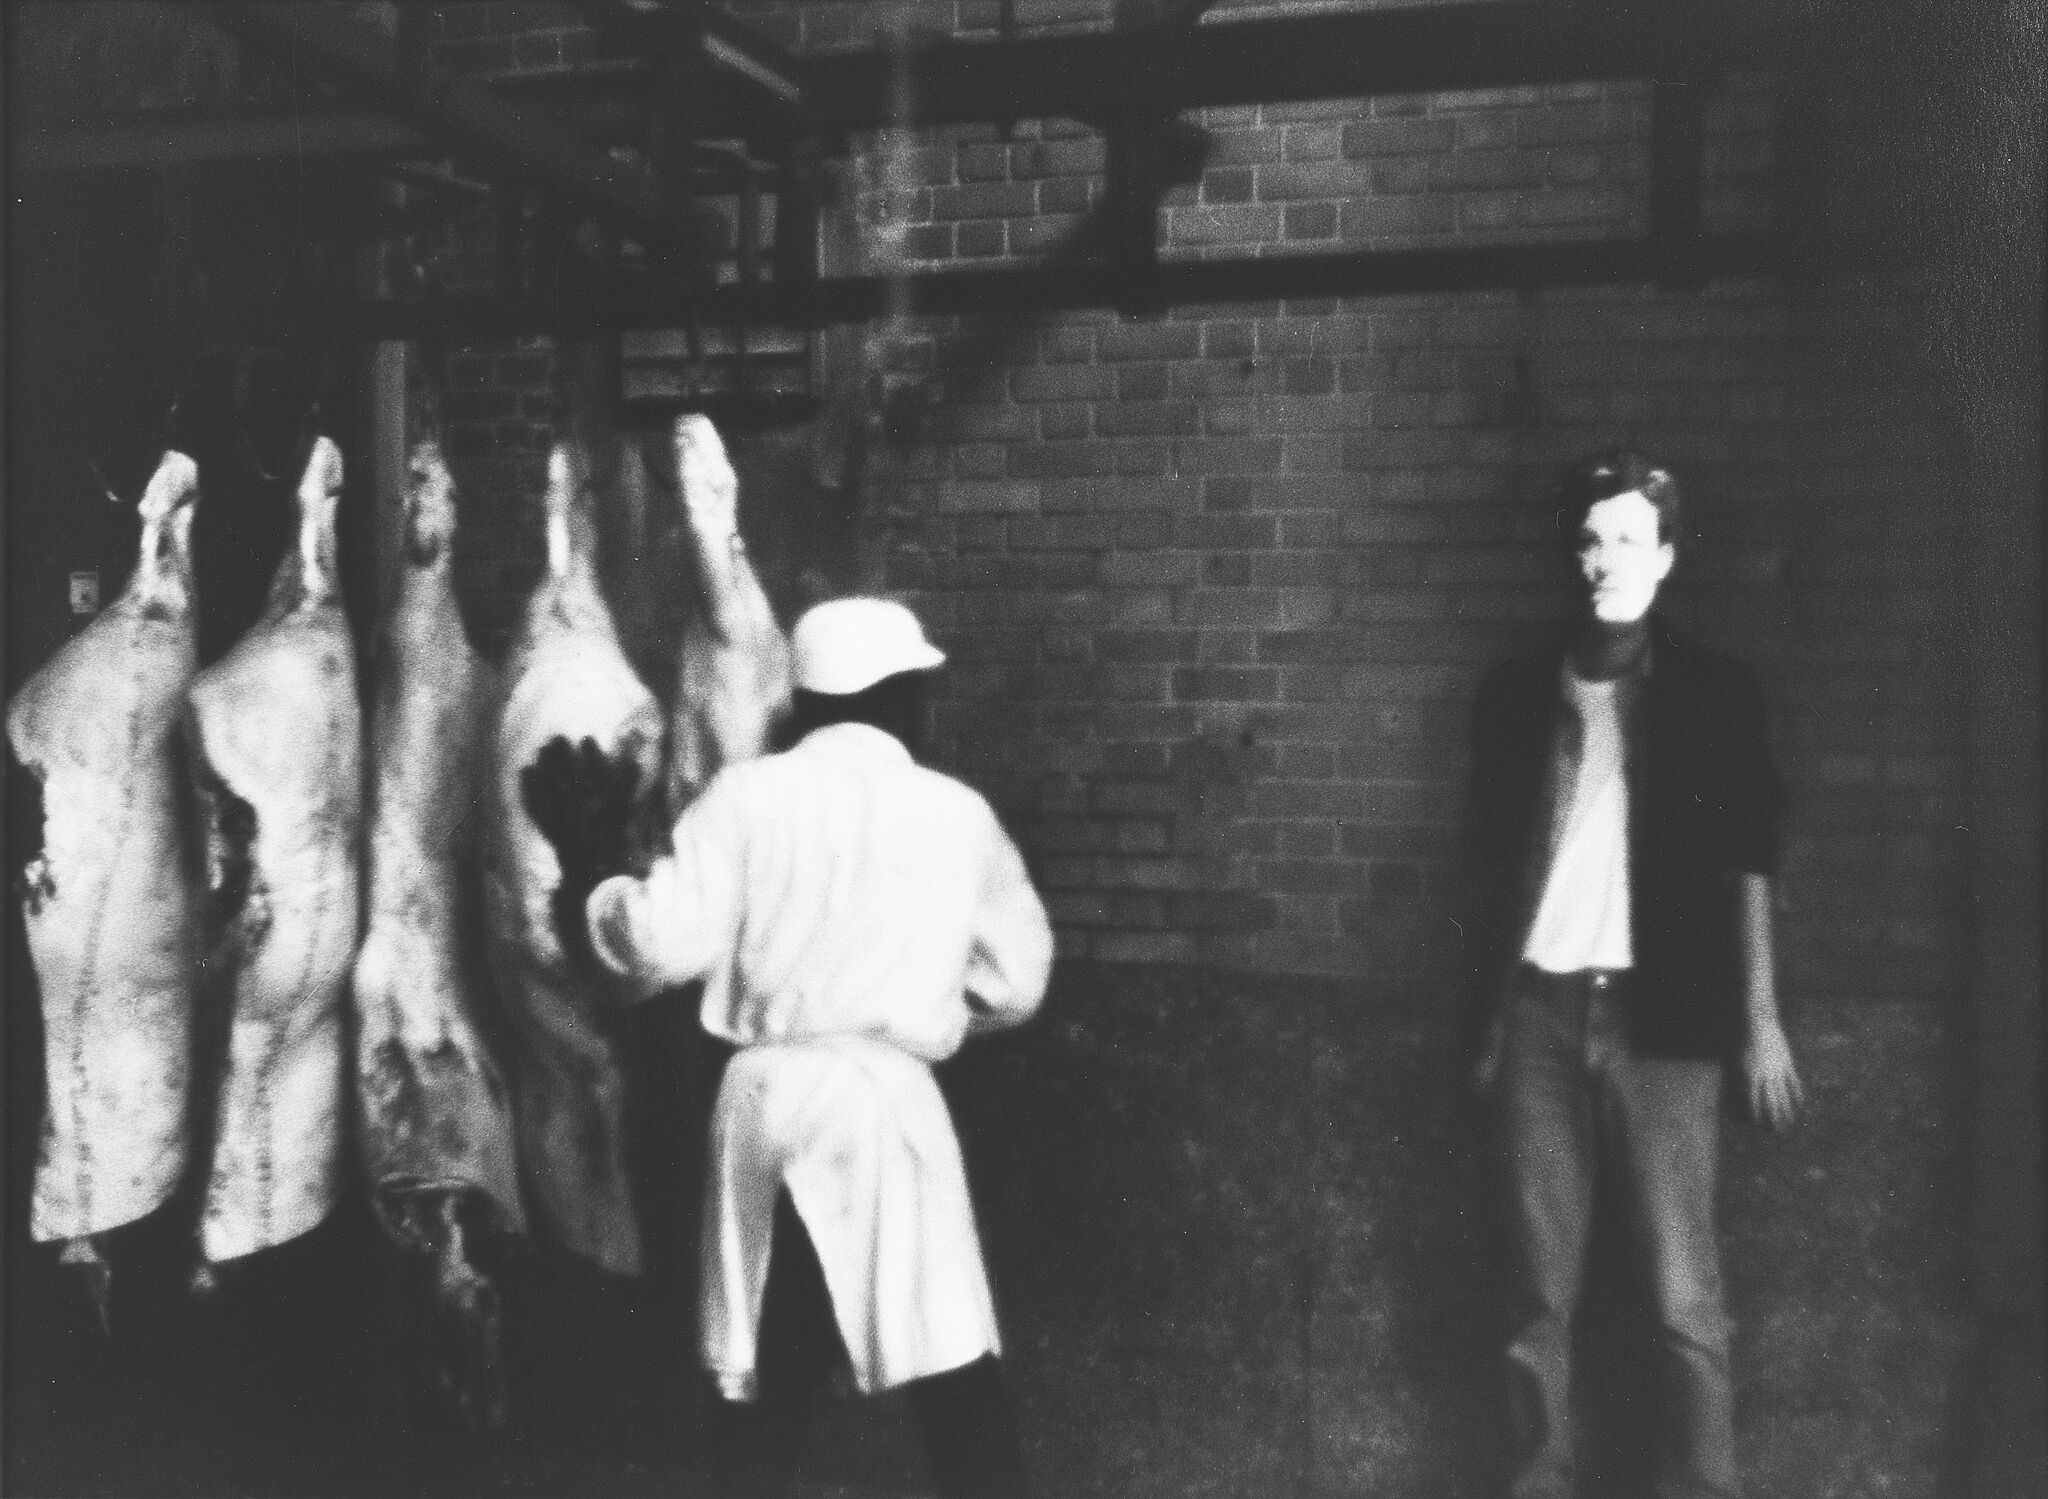 Man with Arthur Rimbaud mask standing in a meat packing factory. 